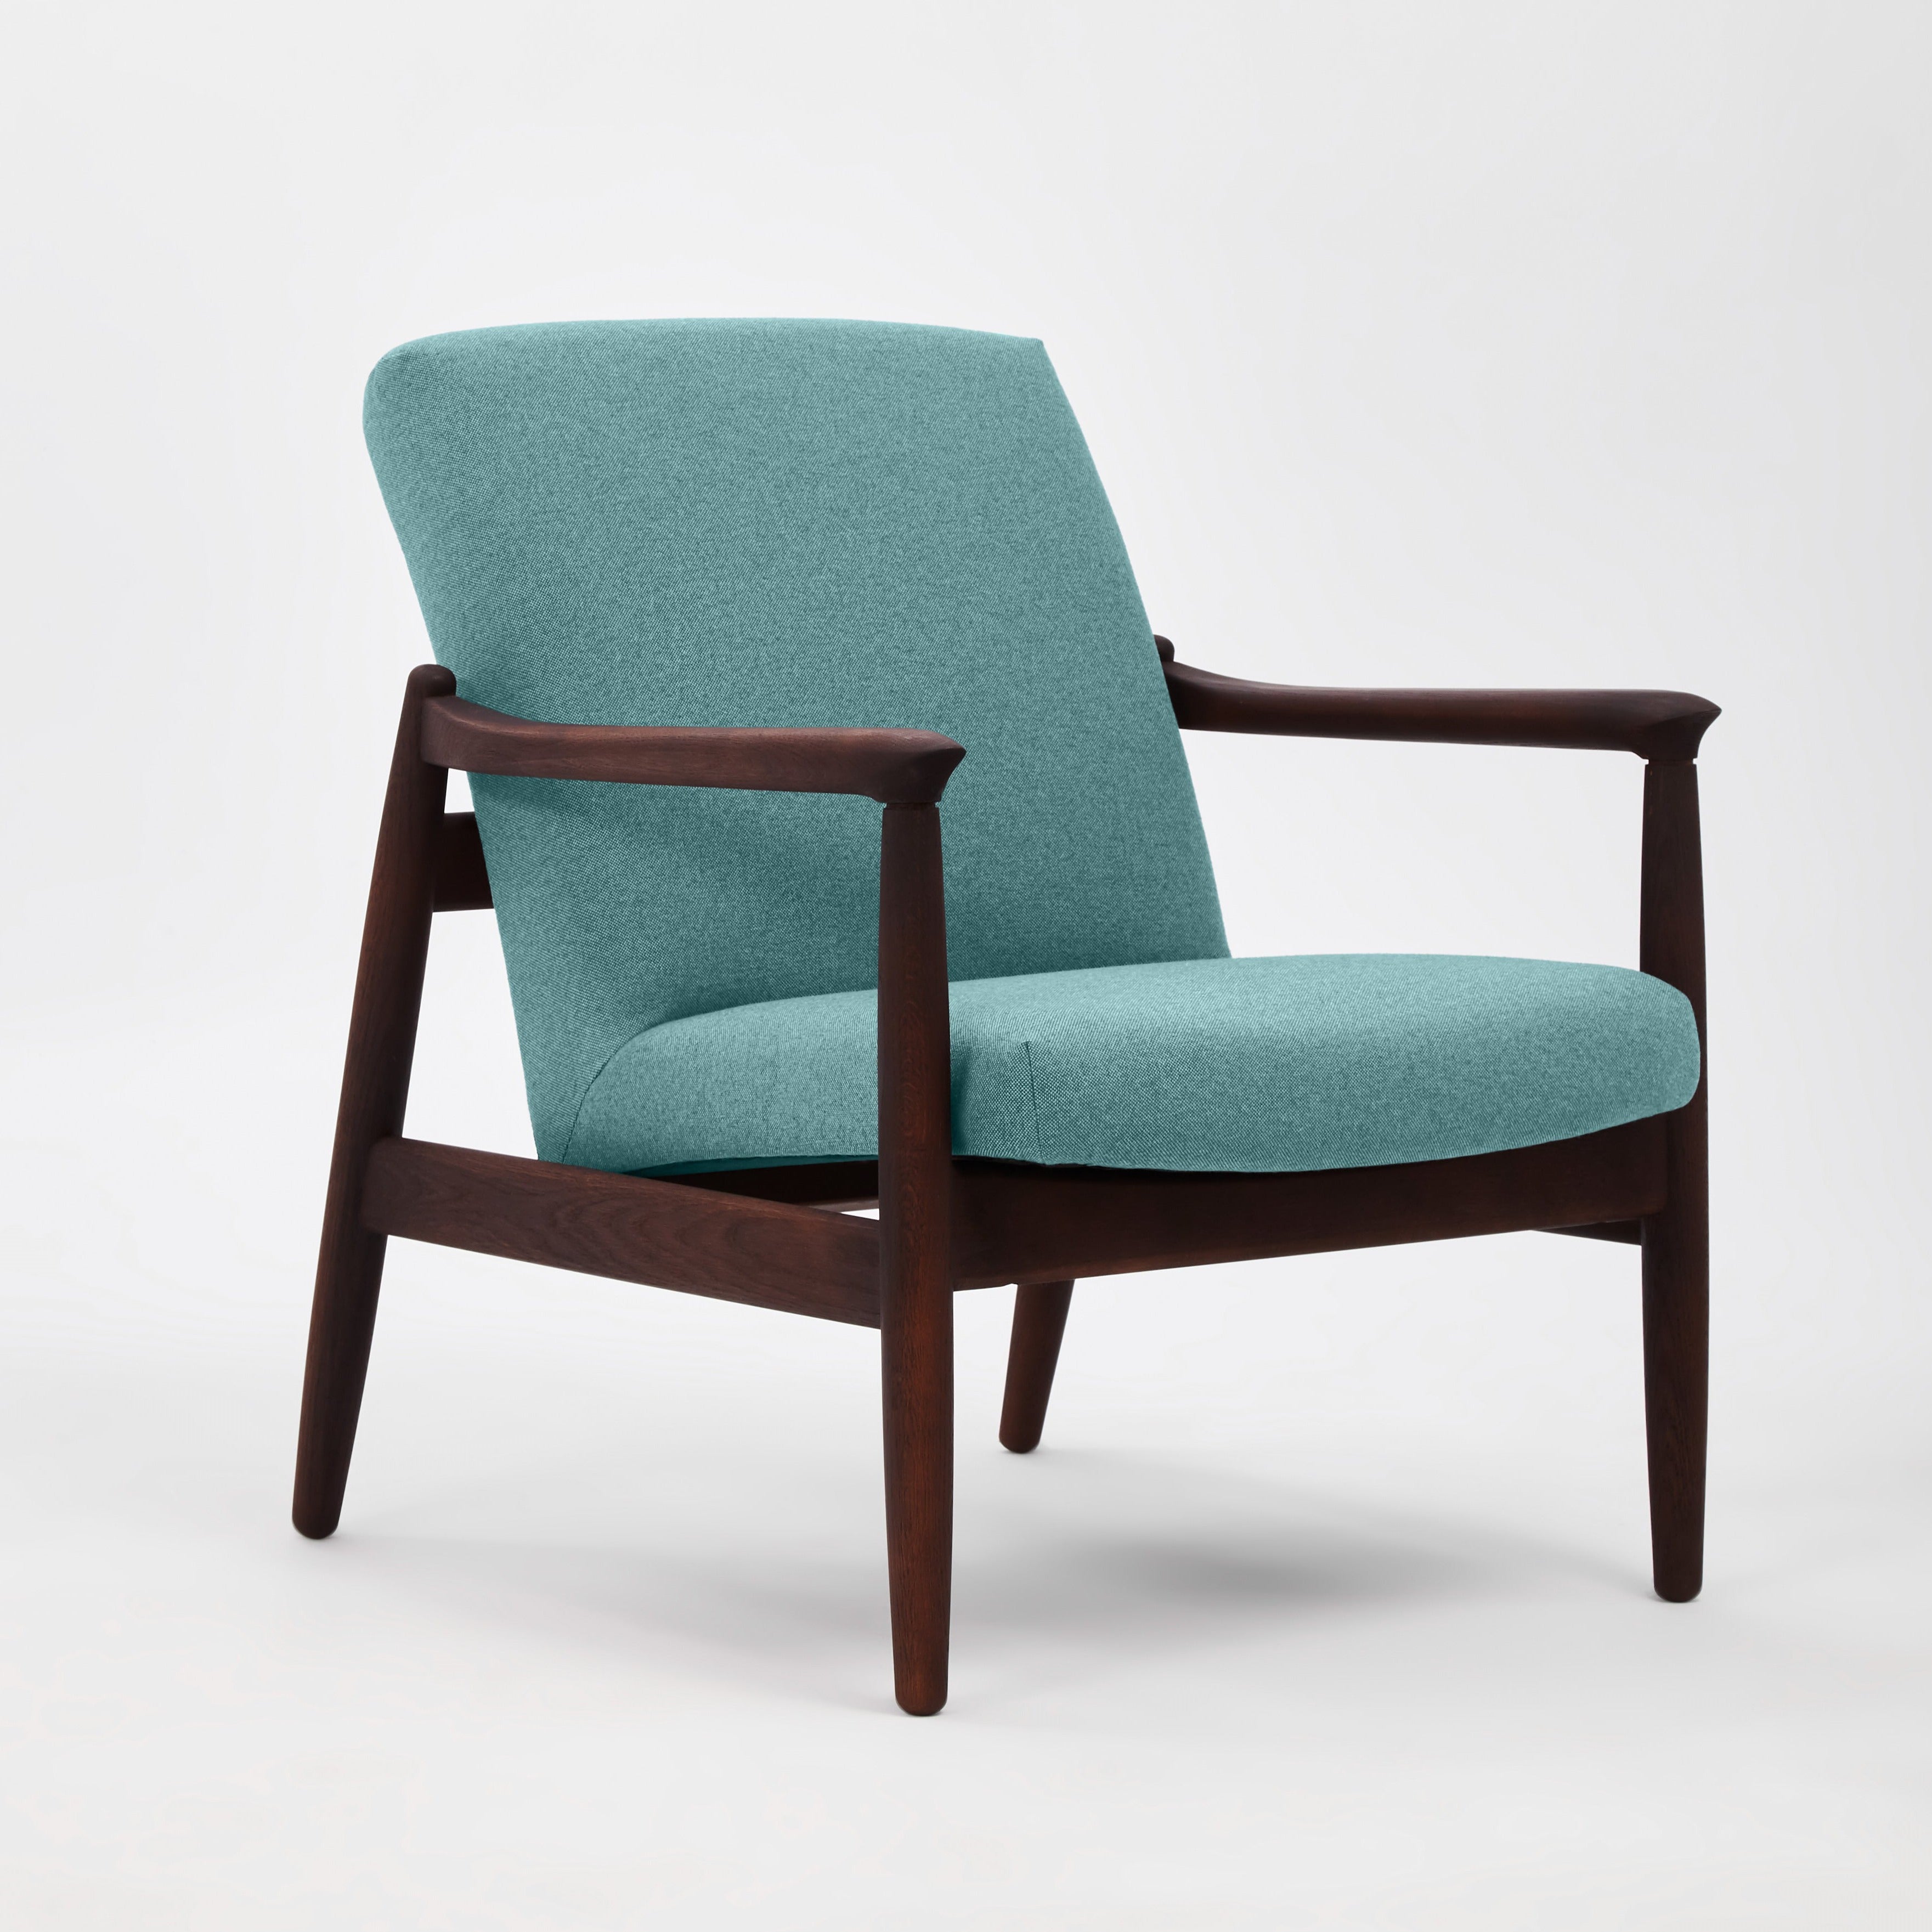 H 64 Lowback Chair Oak oak frame upholstery colour  turquoise